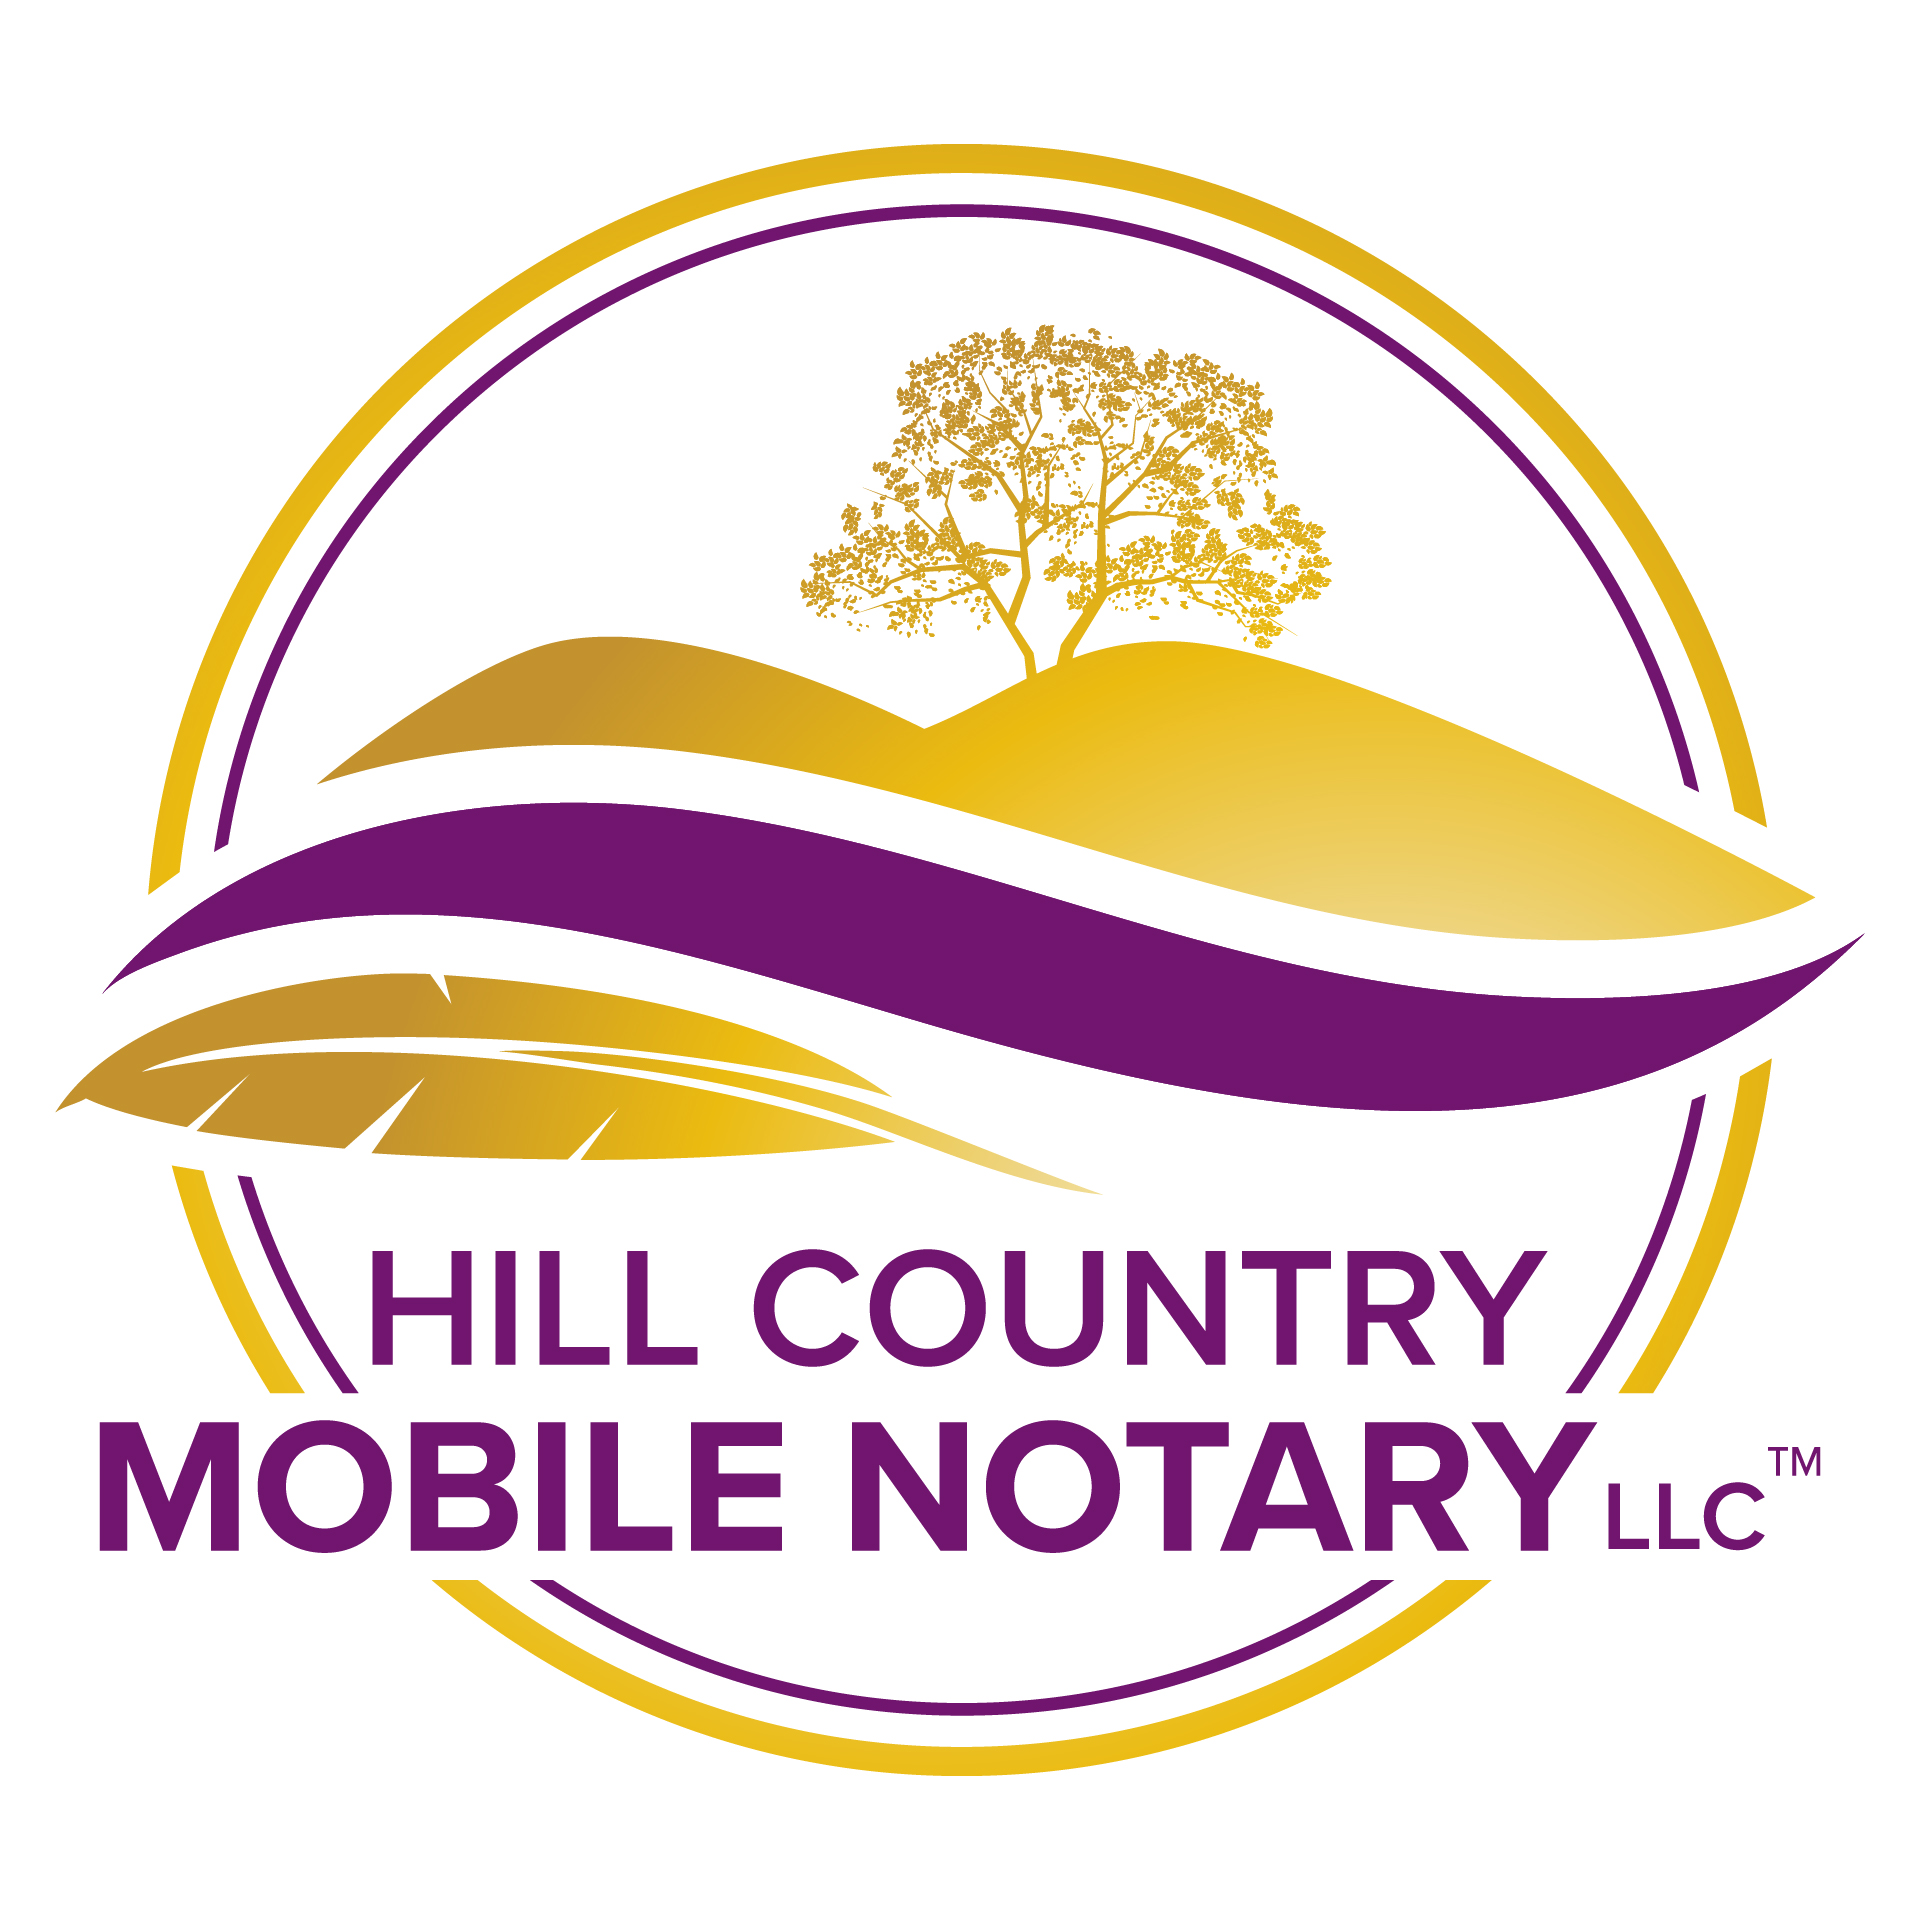 Hill Country Mobile Notary